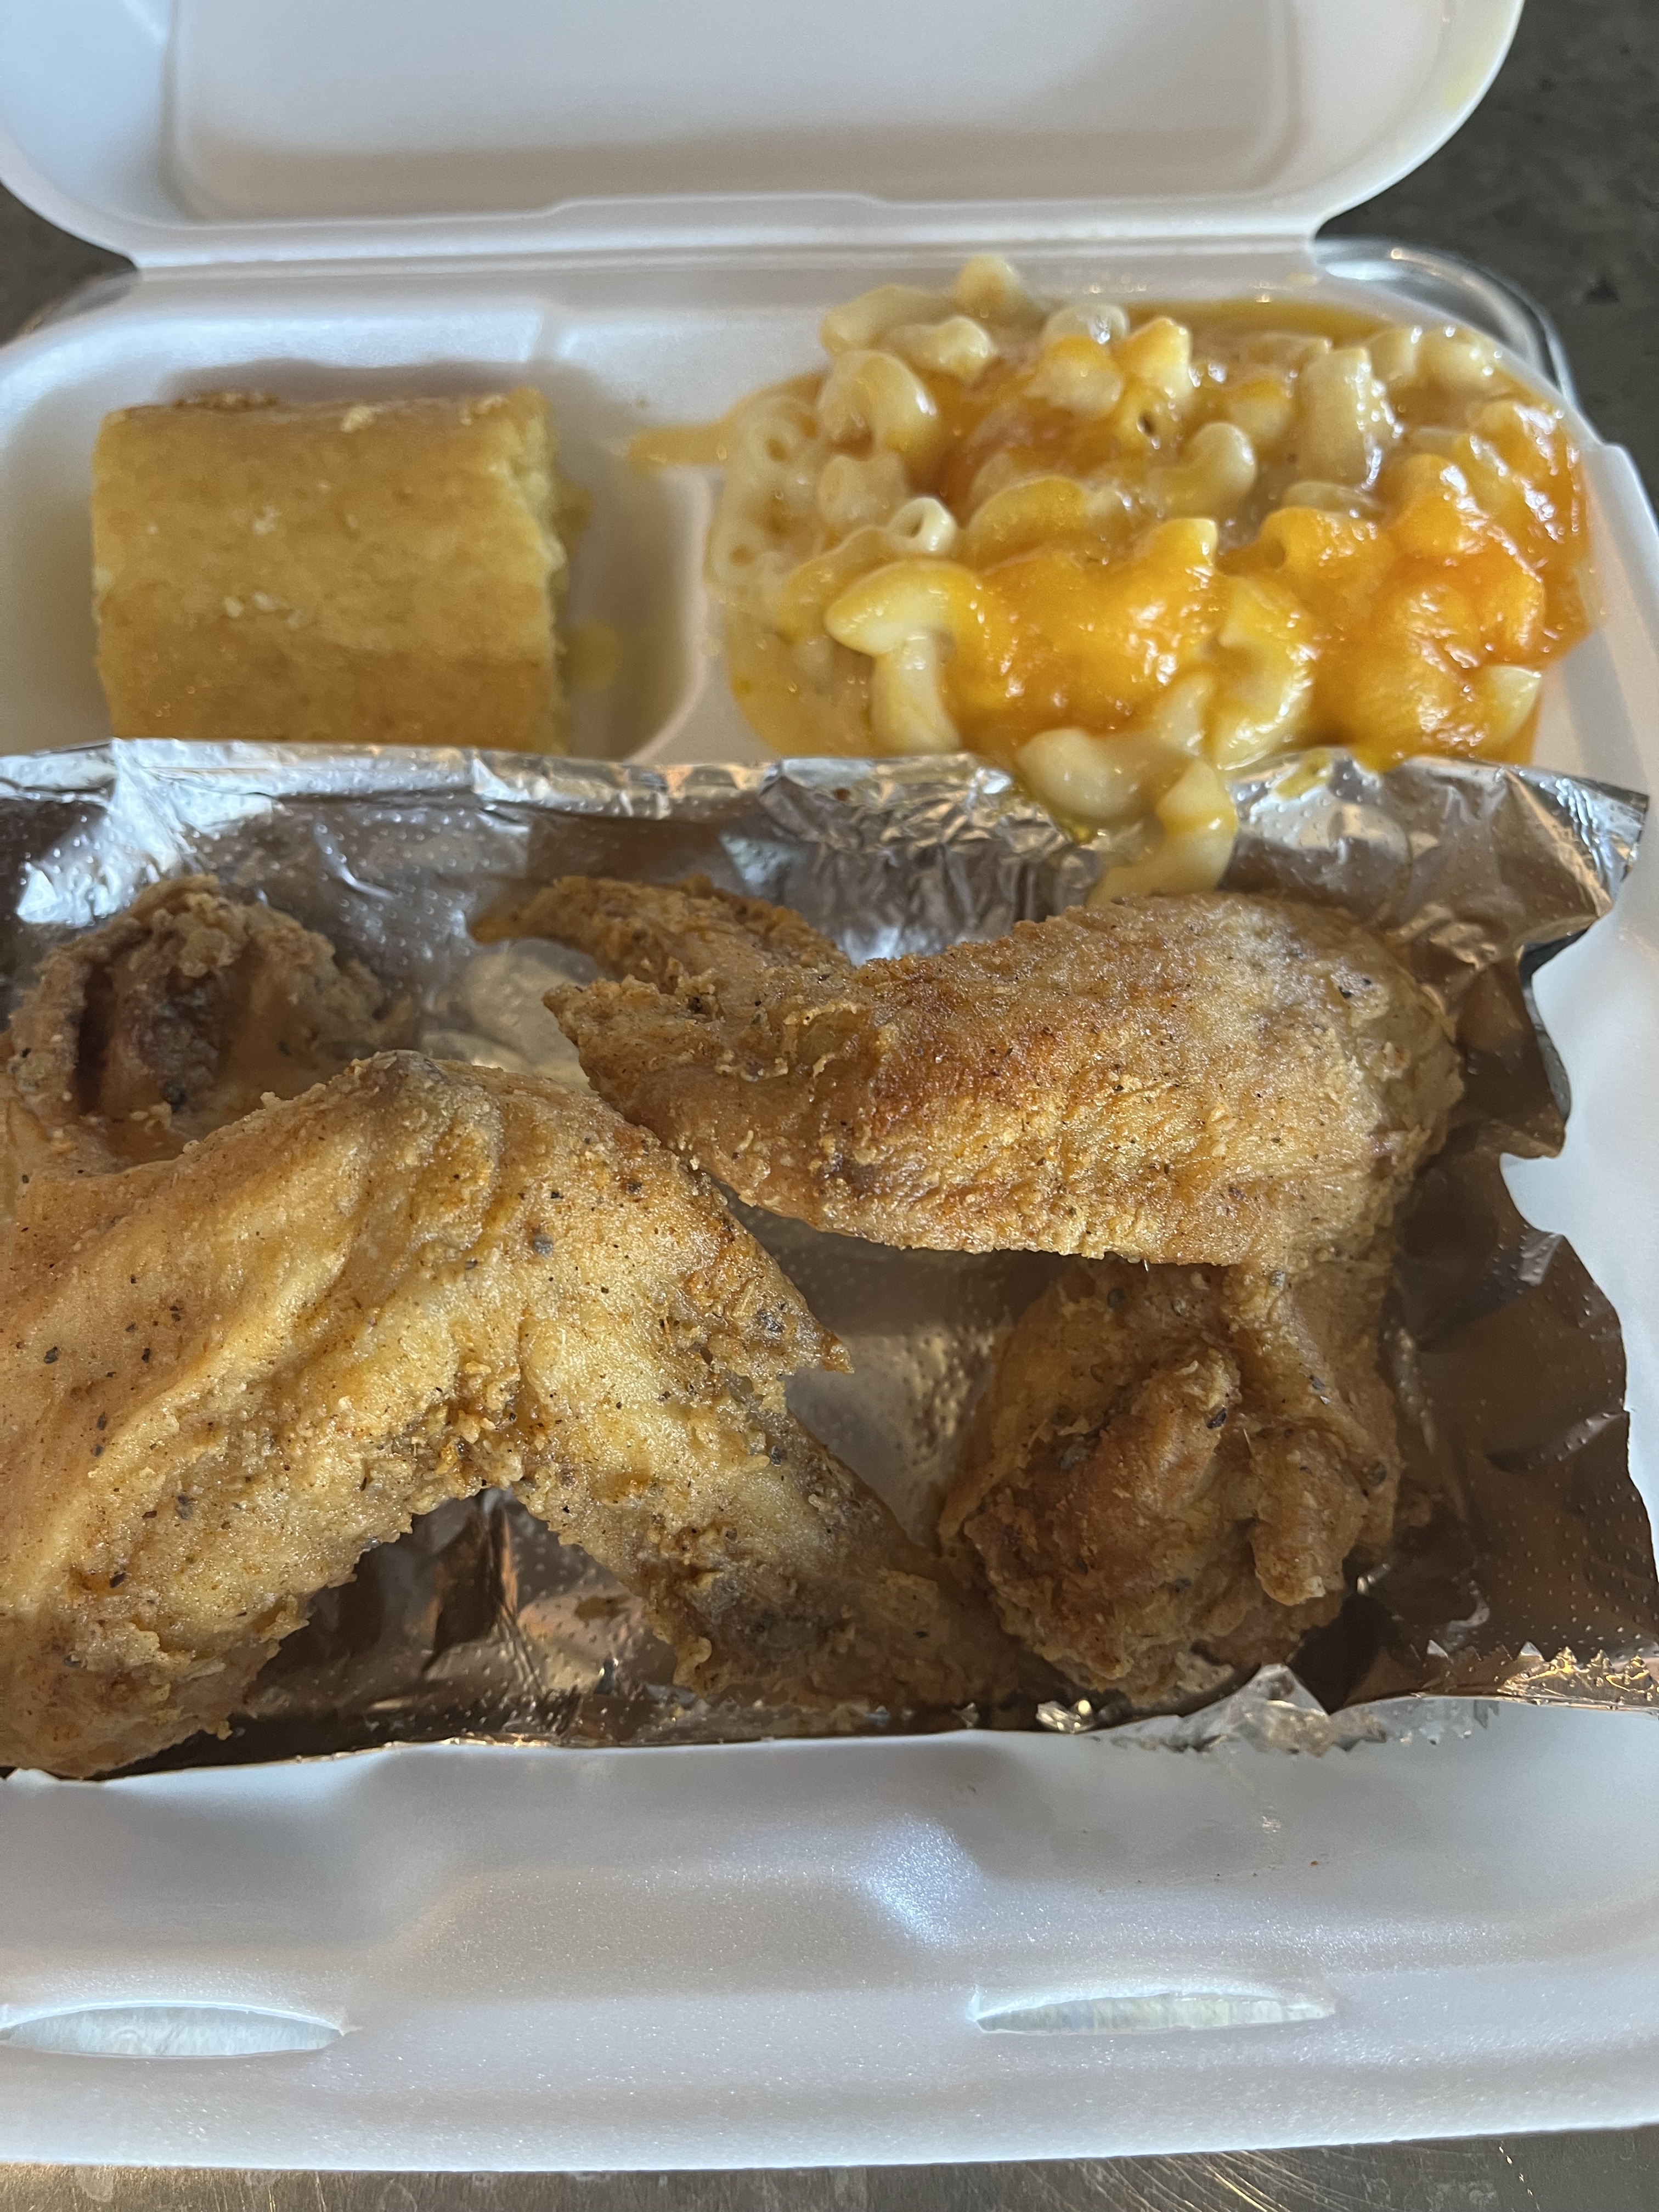 A Styrofoam food container holding fried chicken, mac-and-cheese and a piece of cornbread